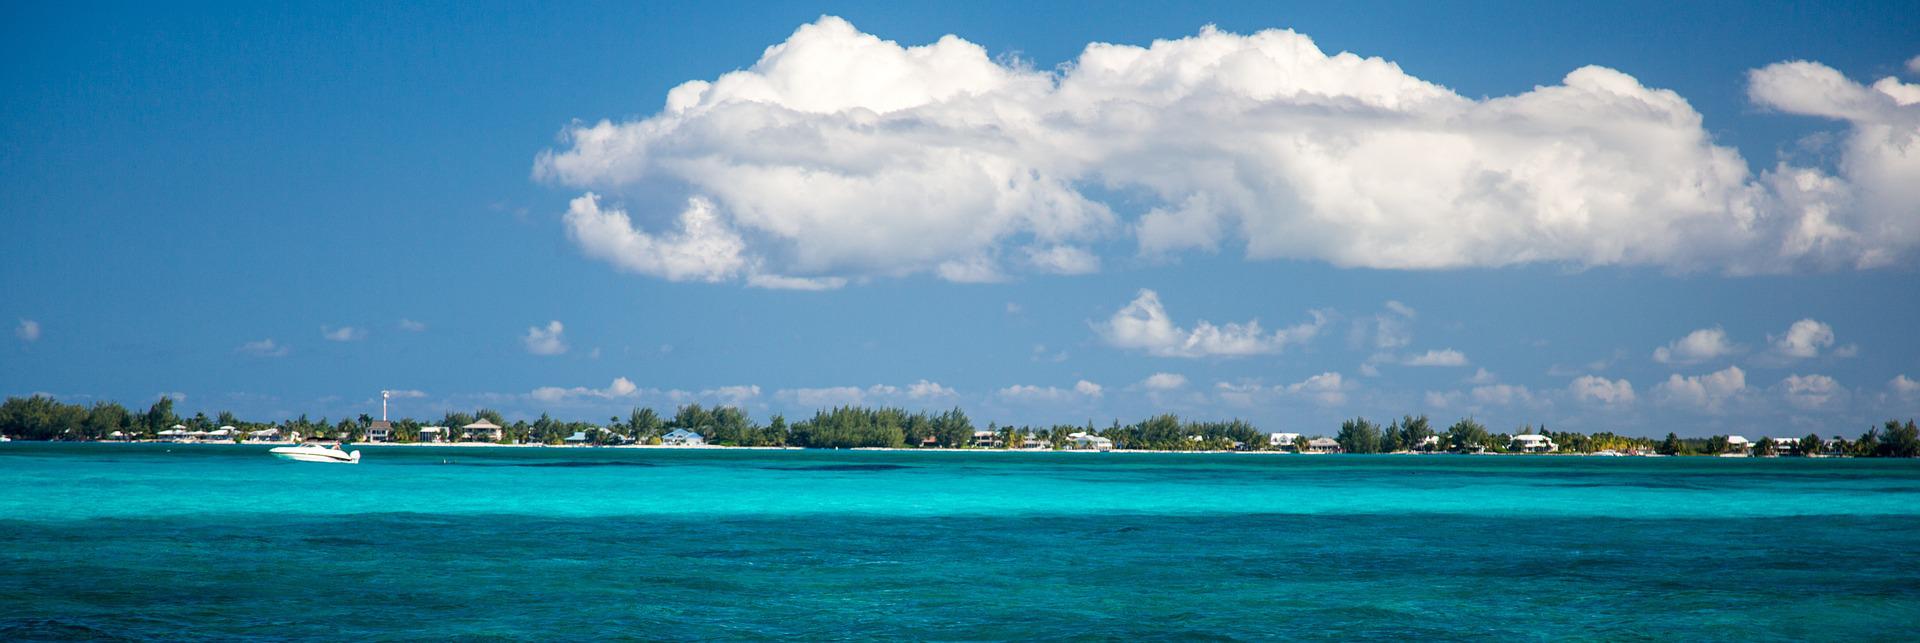 Guide to Grand Cayman's Seven Mile Beach (Everything You Need to Know) image